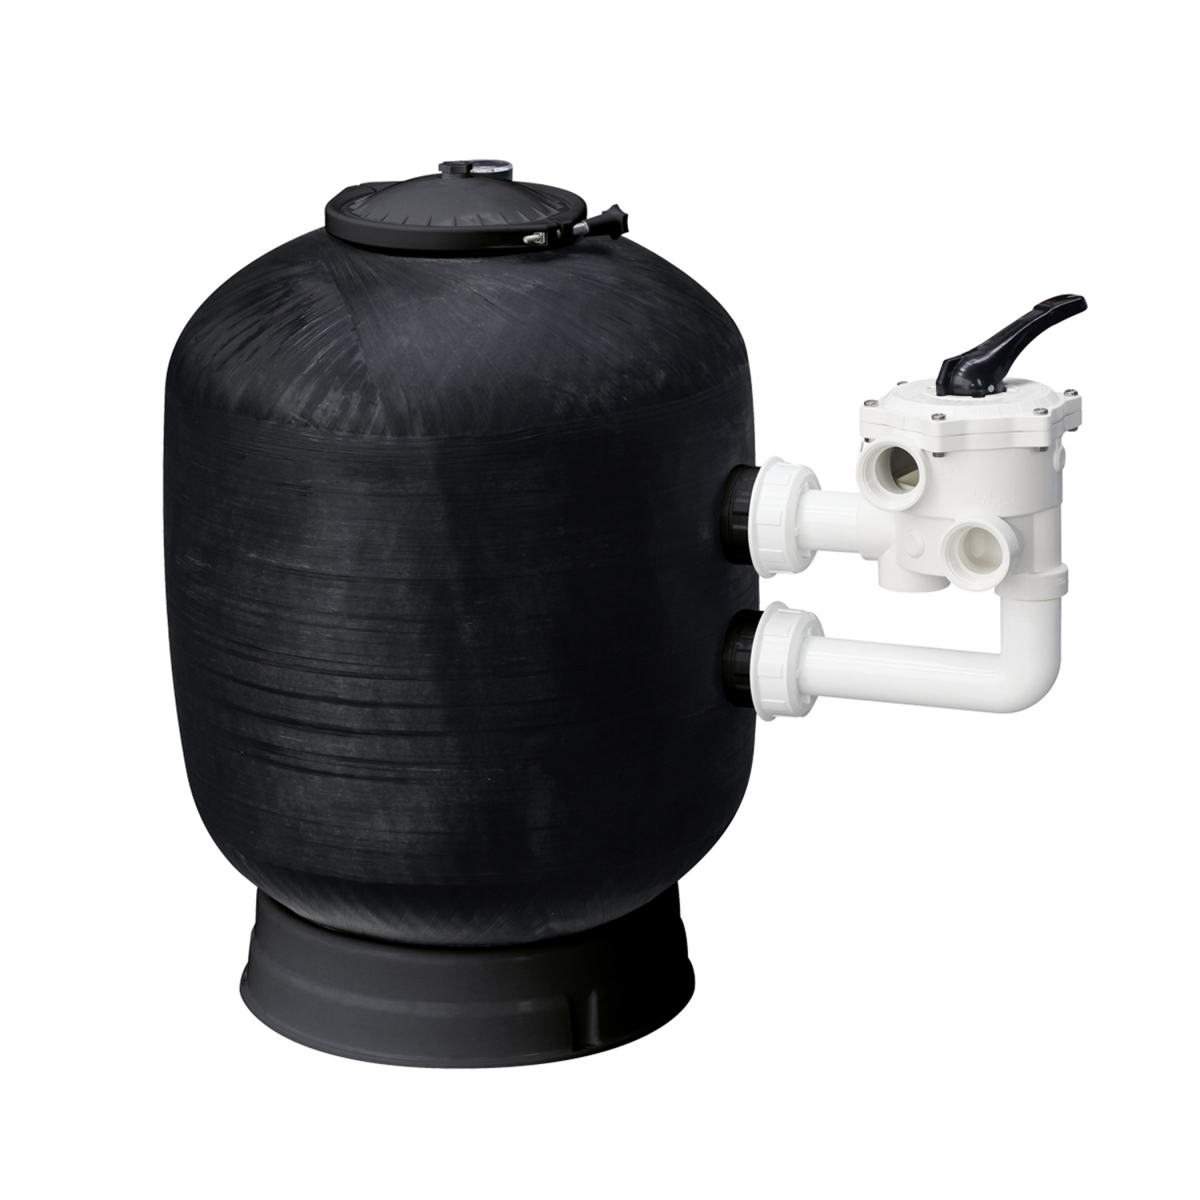 Polyester Filter side mount black d700 - 28" with manometer incl. pipe-system neutral and single packing with original Praher 1 1/2" 6 way manuel valve Polyester Filter side mount black d700 - 28" with manometer incl. pipe-system neutral and single packing with original Praher 1 1/2" 6 way manuel valve